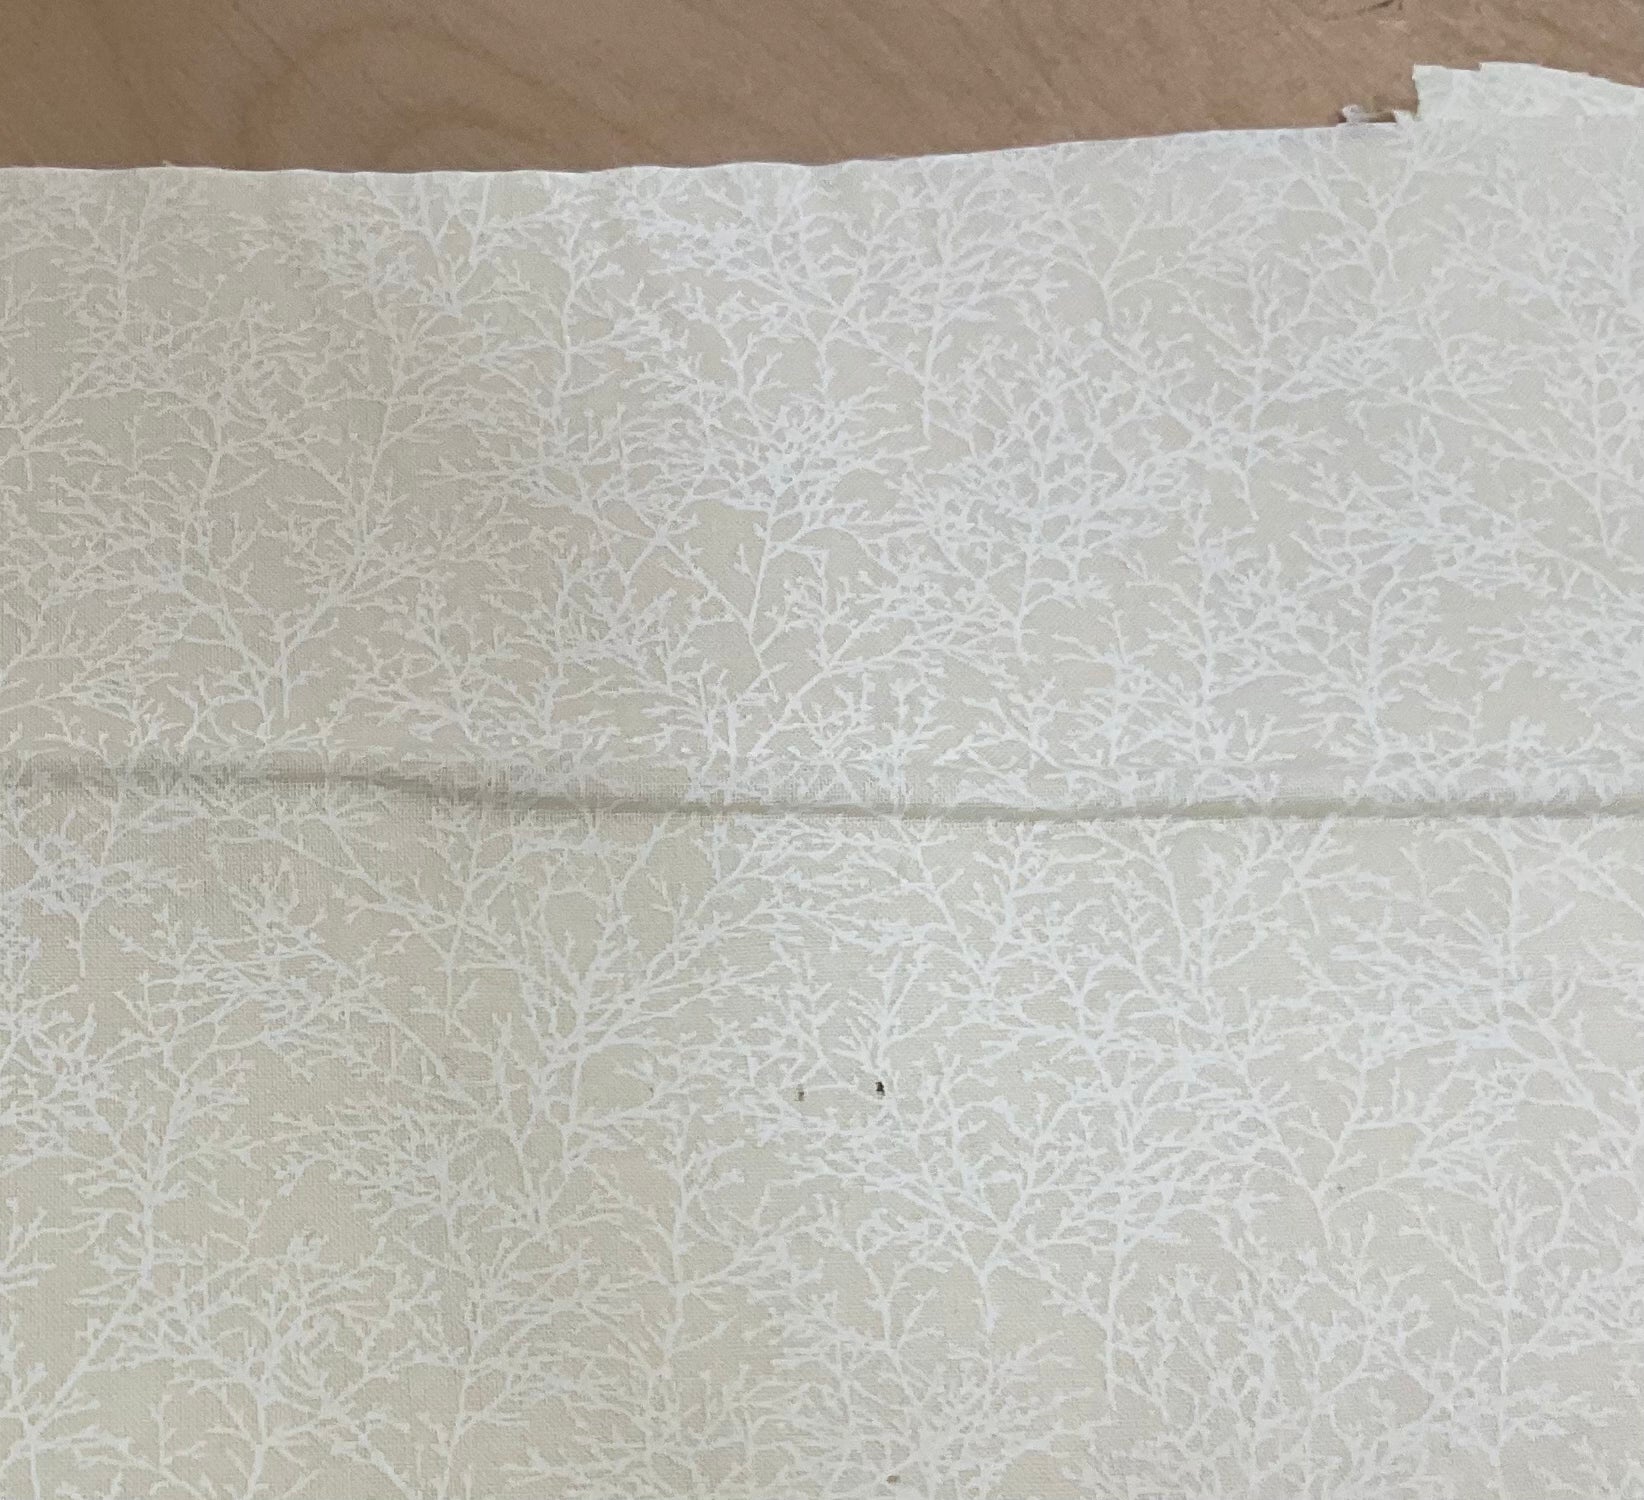 REMNANT  - (FLAWED) 50cm branches on ecru quilting cotton